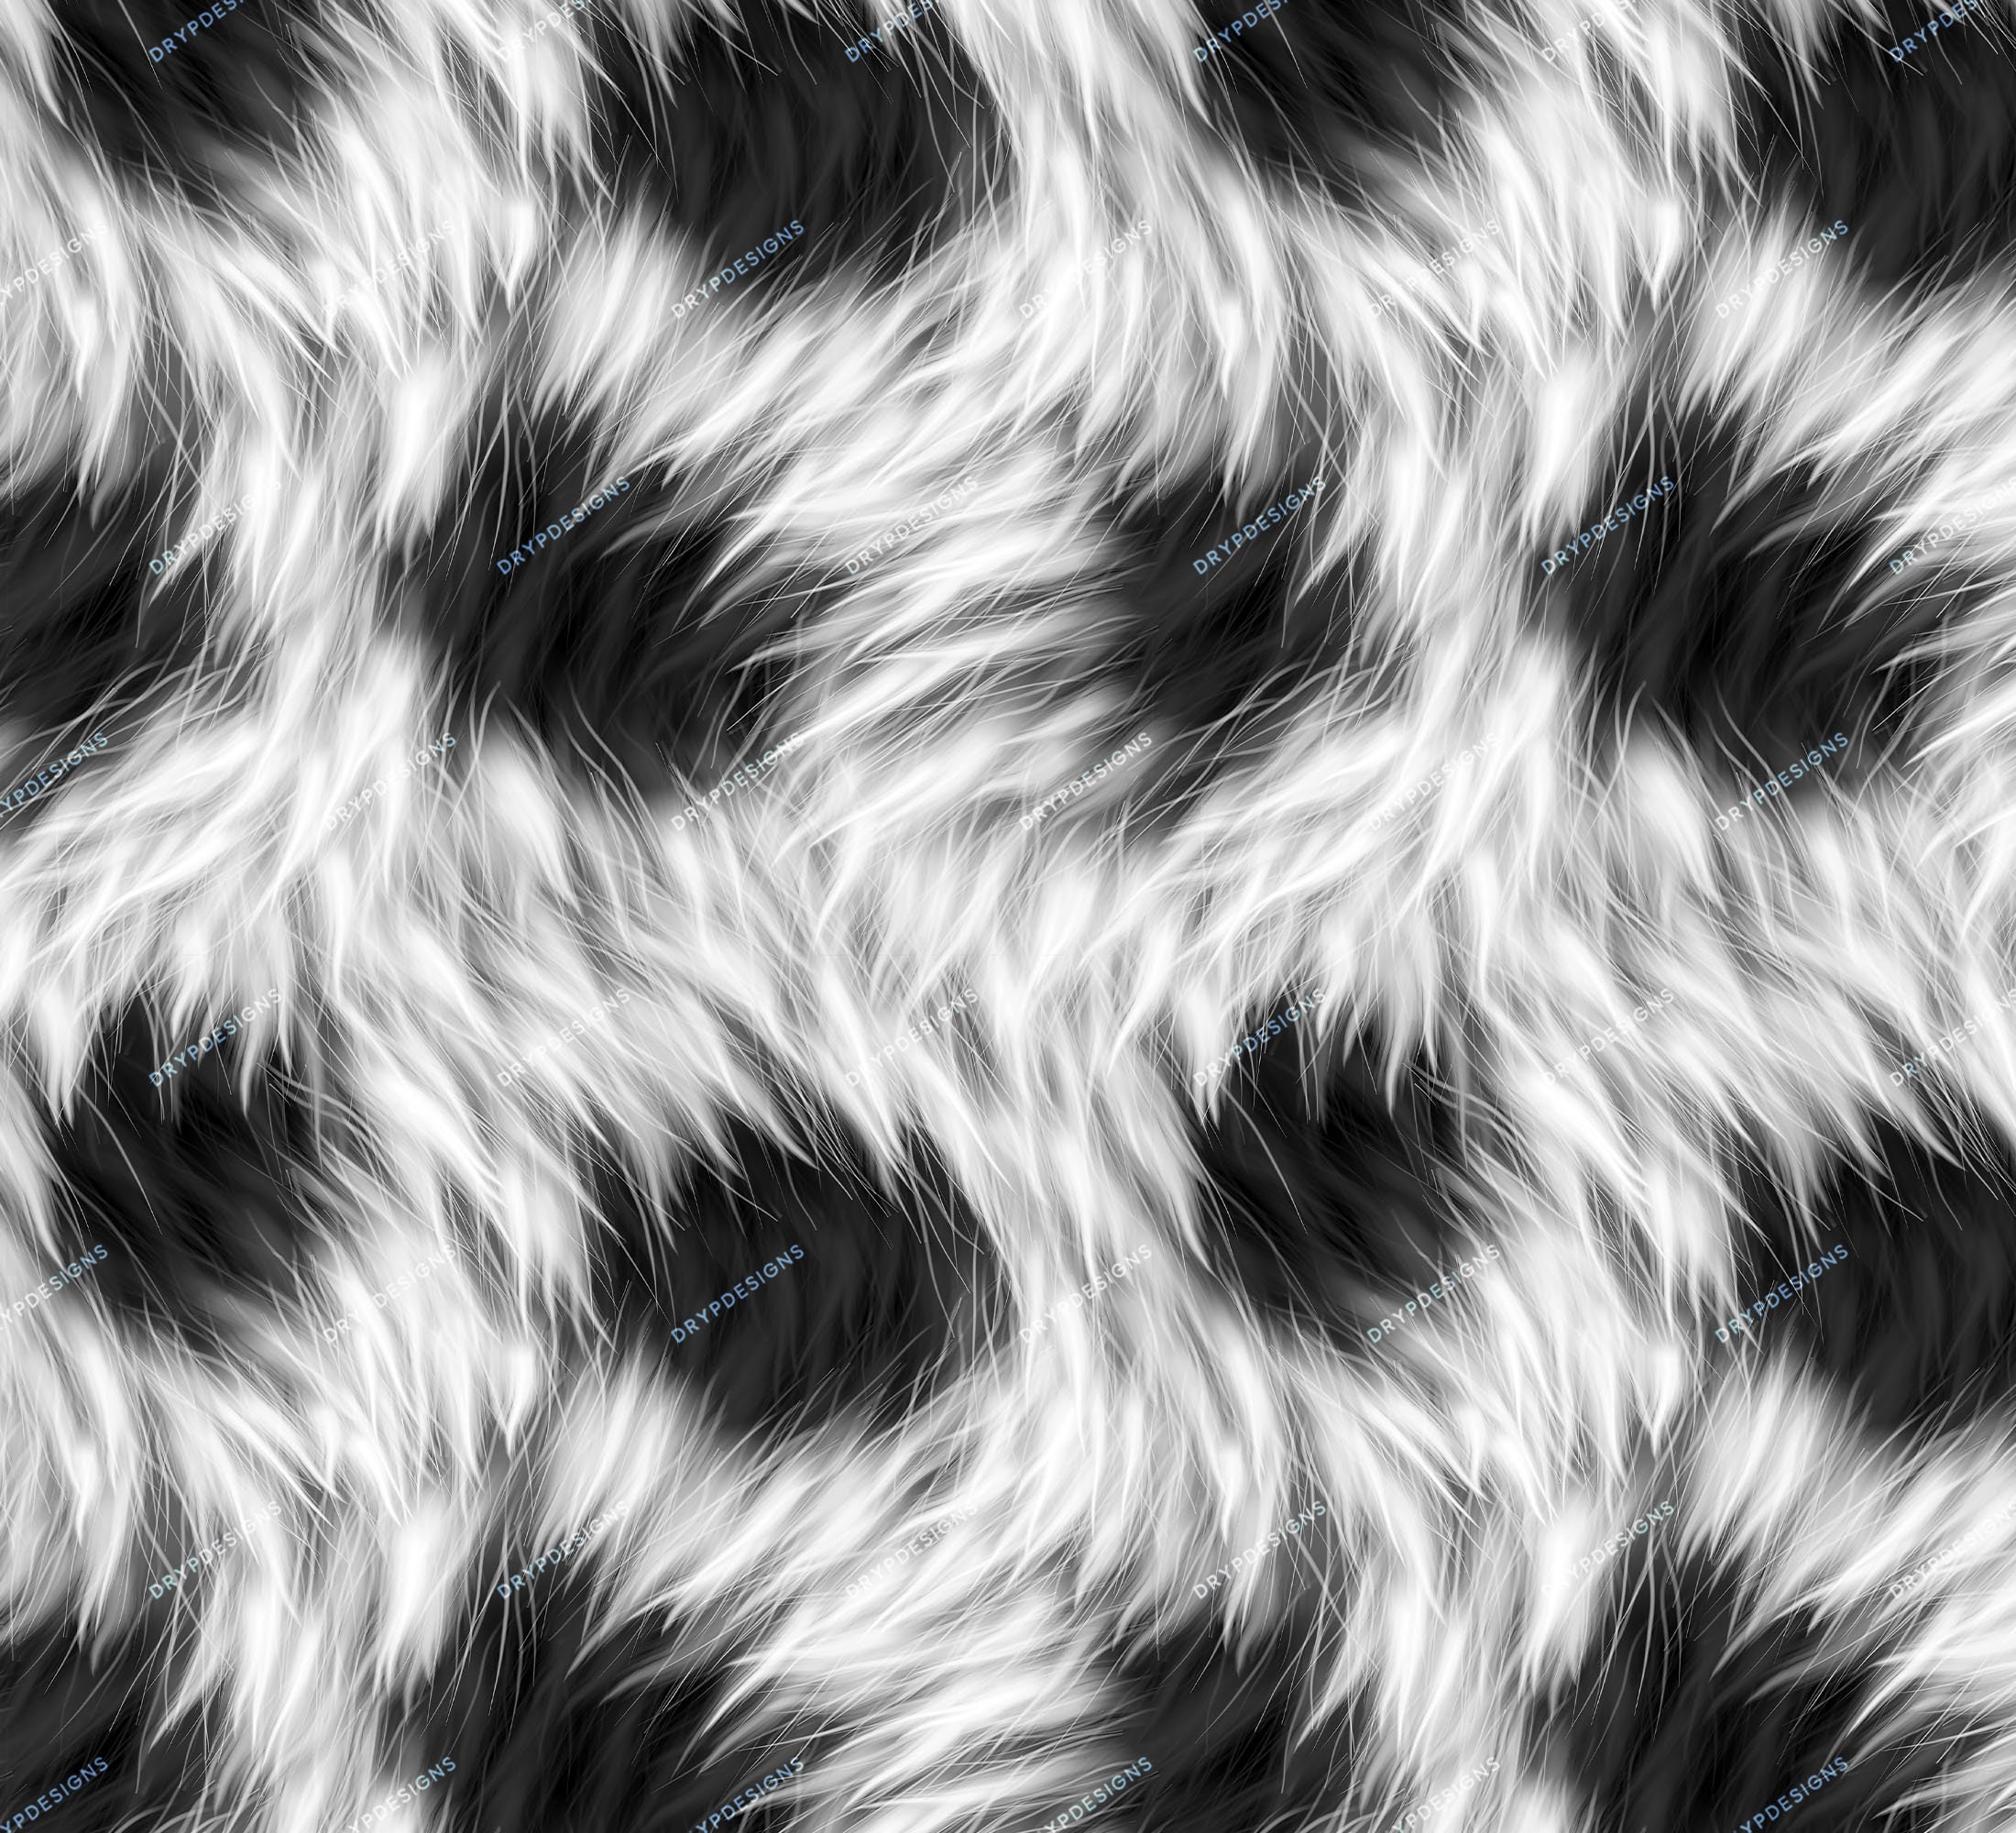 Black White Spotted Animal Fur Seamless Digital Paper Background